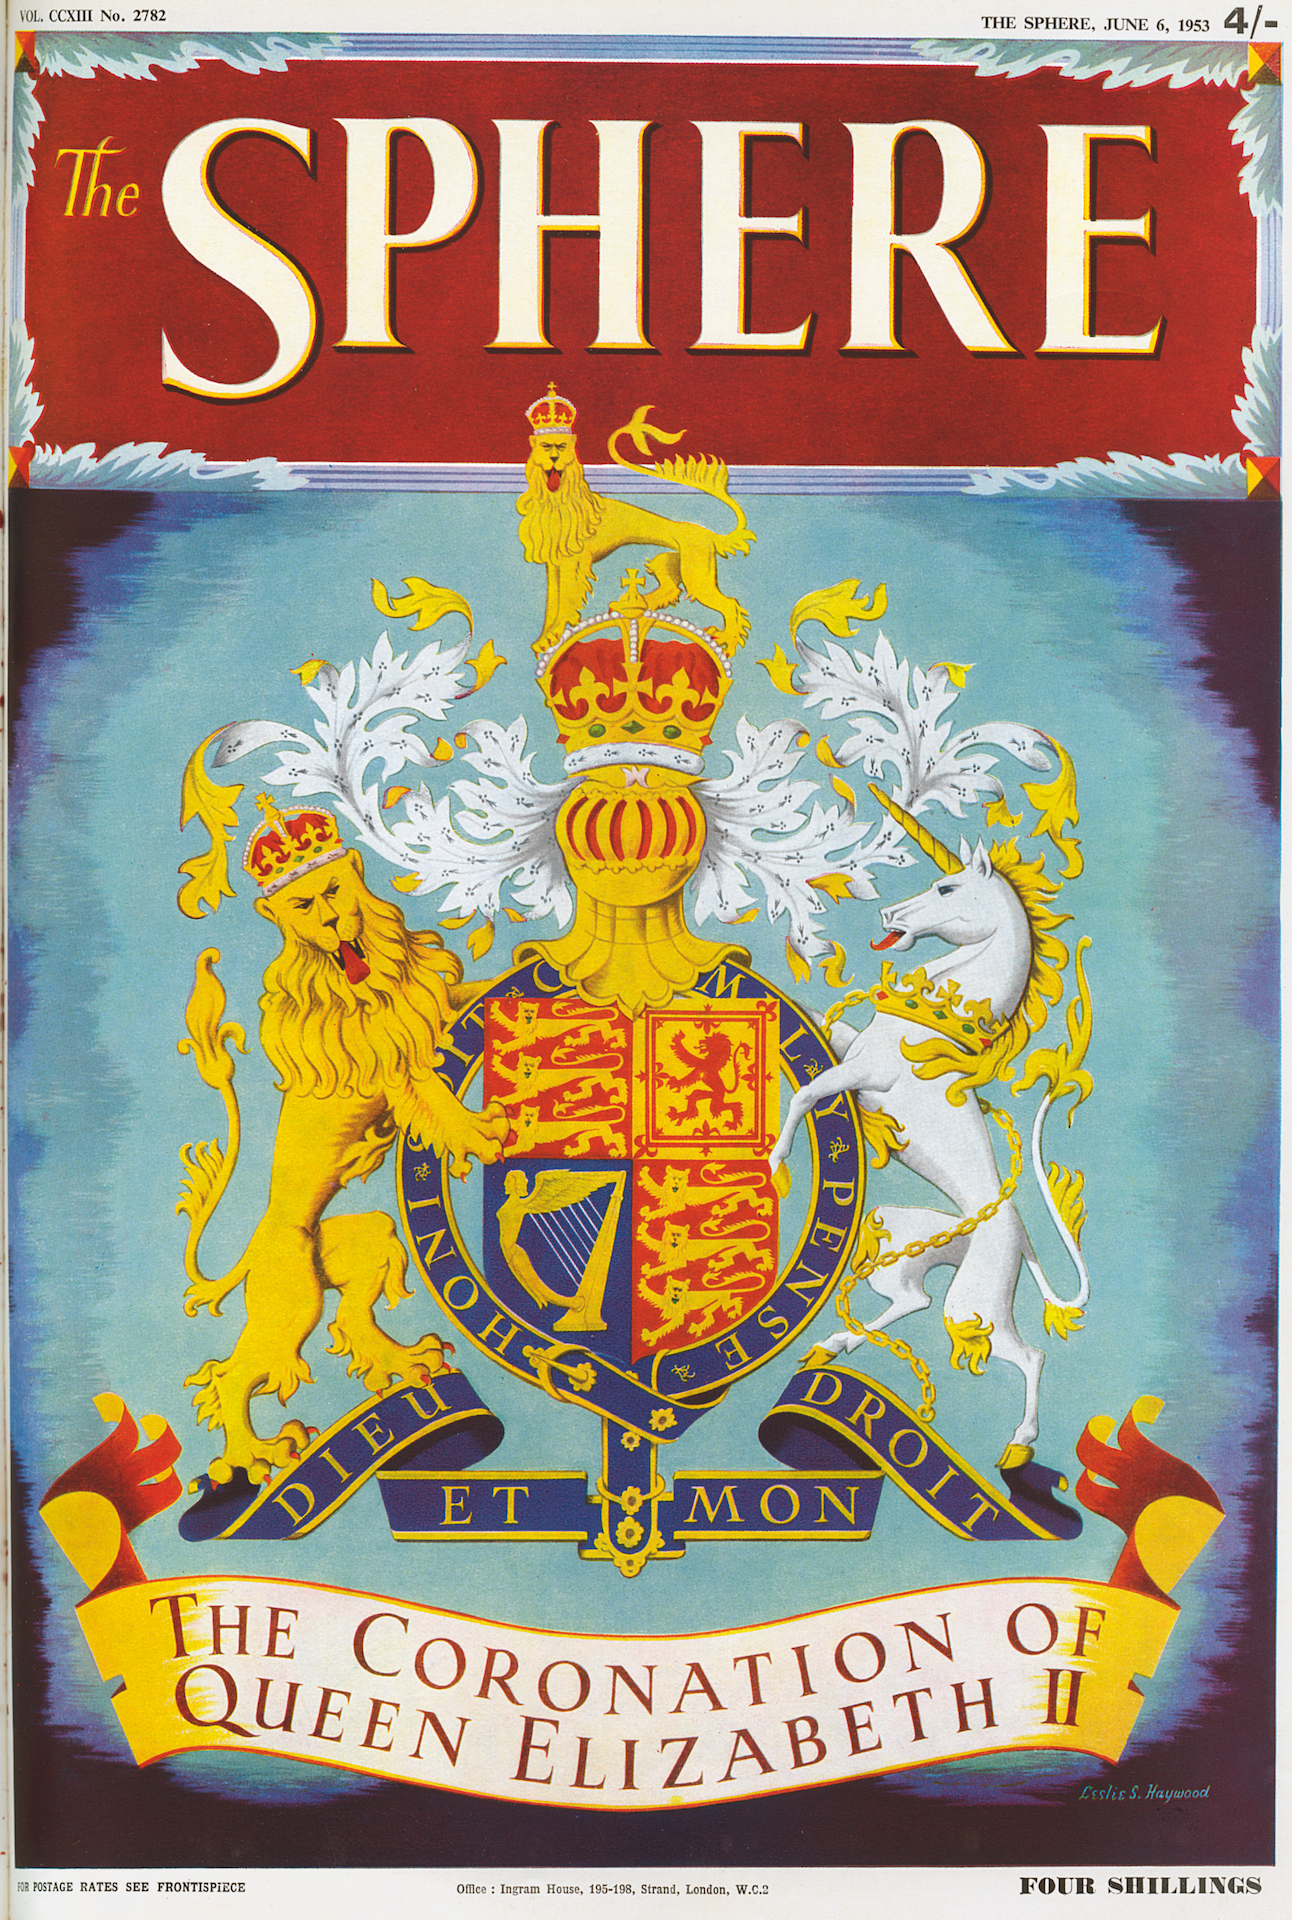 The SPHERE Coronation Number front cover on 6 June 1953 